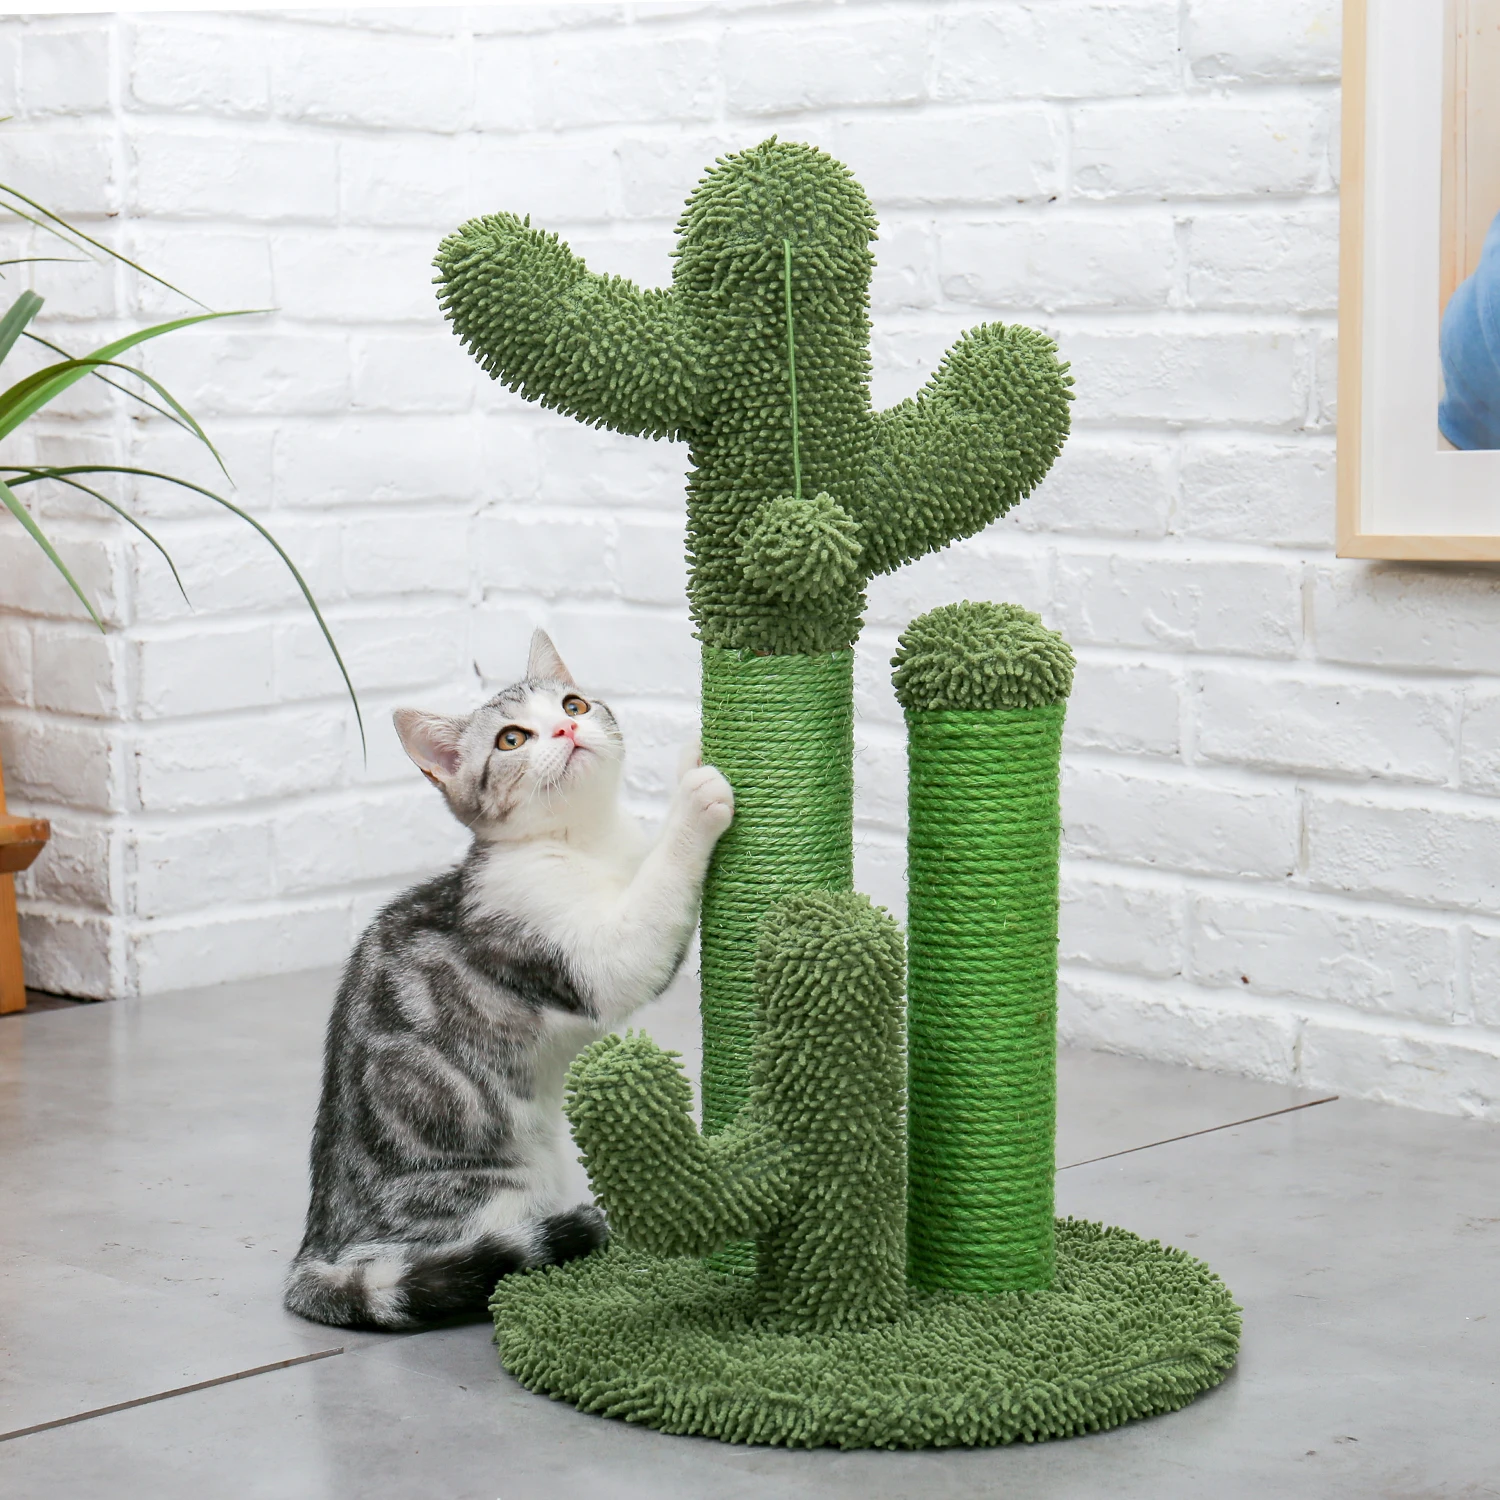 aliexpress.com - Cute Cactus Pet Cat Tree Toys with Ball Scratcher Posts for Cats Kitten Climbing Tree Cat Toy Protecting Furniture Fast Delivery